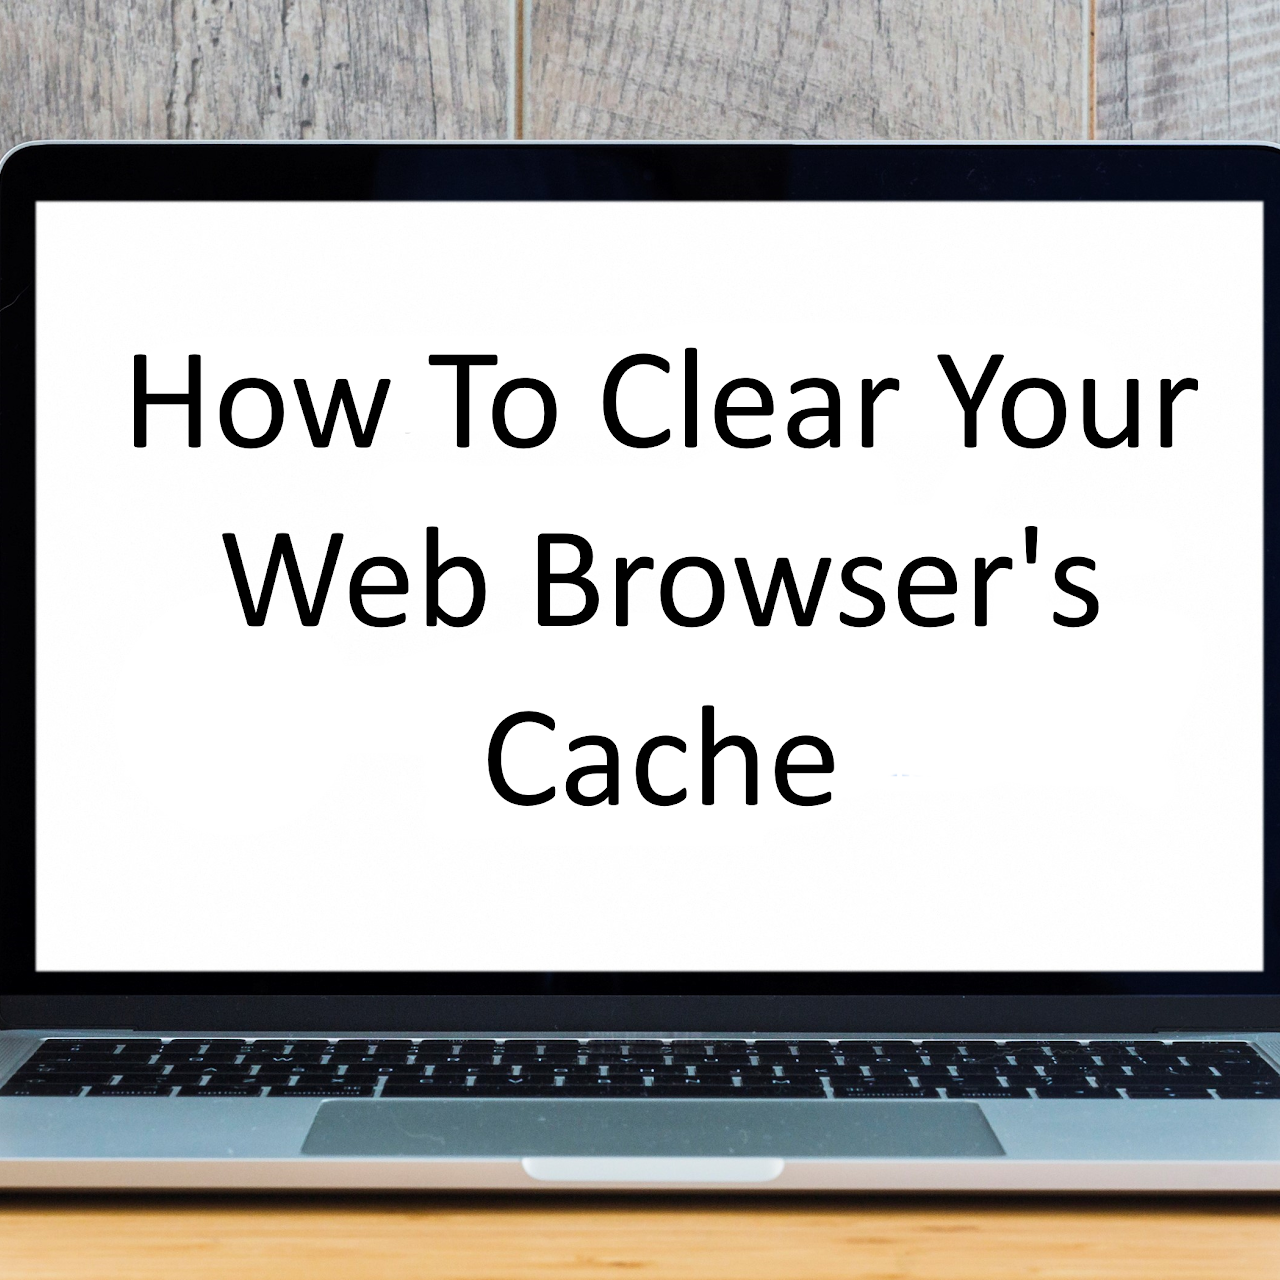 How To Clear Your Web Browser's Cache